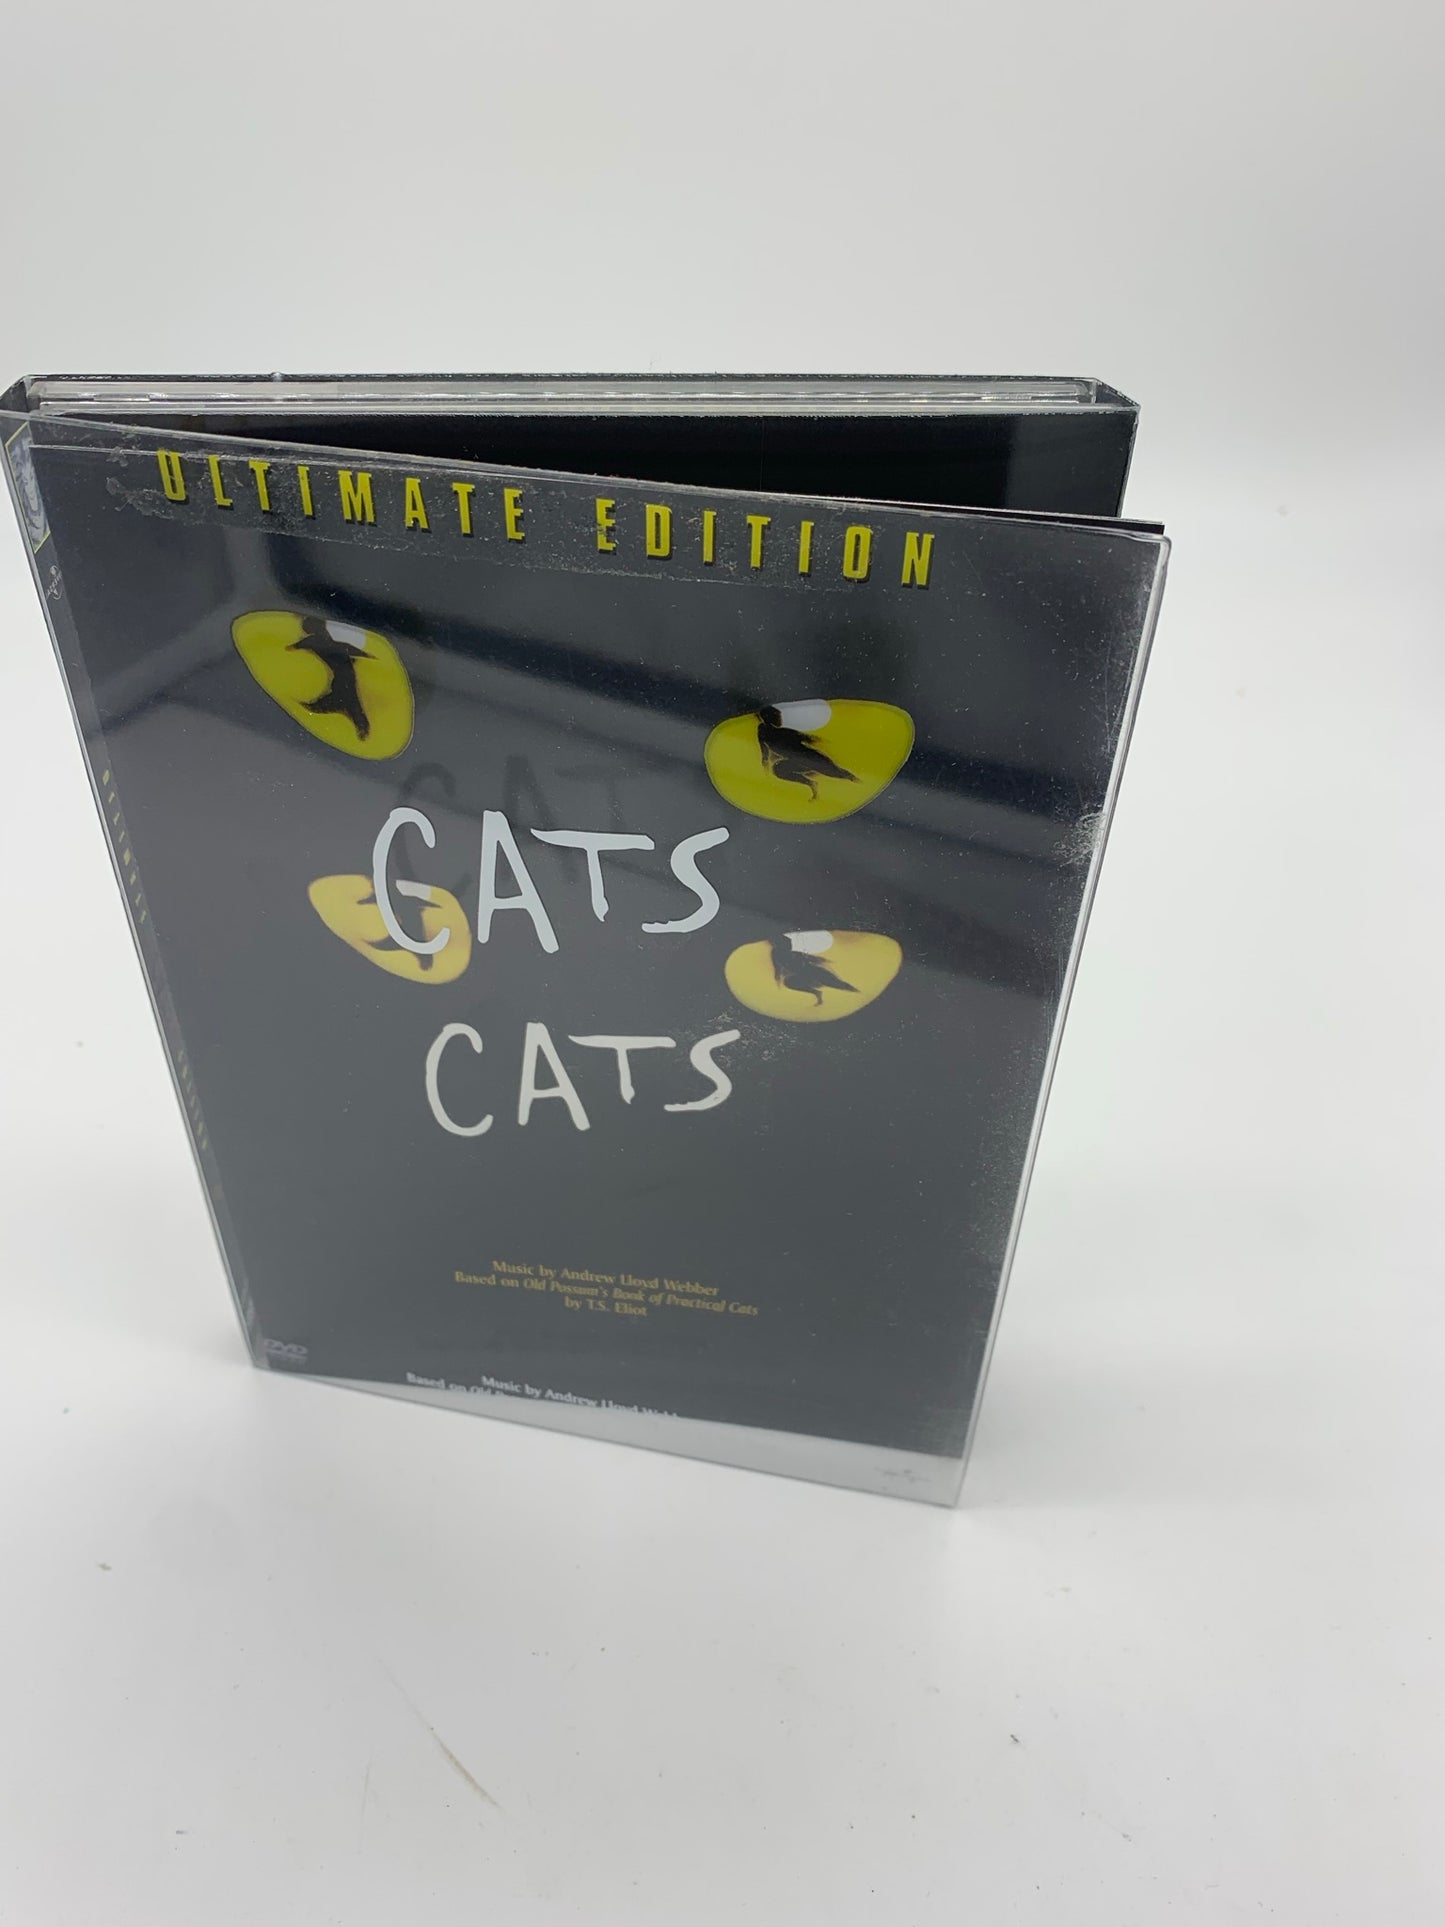 Cats: The Musical (DVD, 2001, 2-Disc Set, Ultimate Edition)